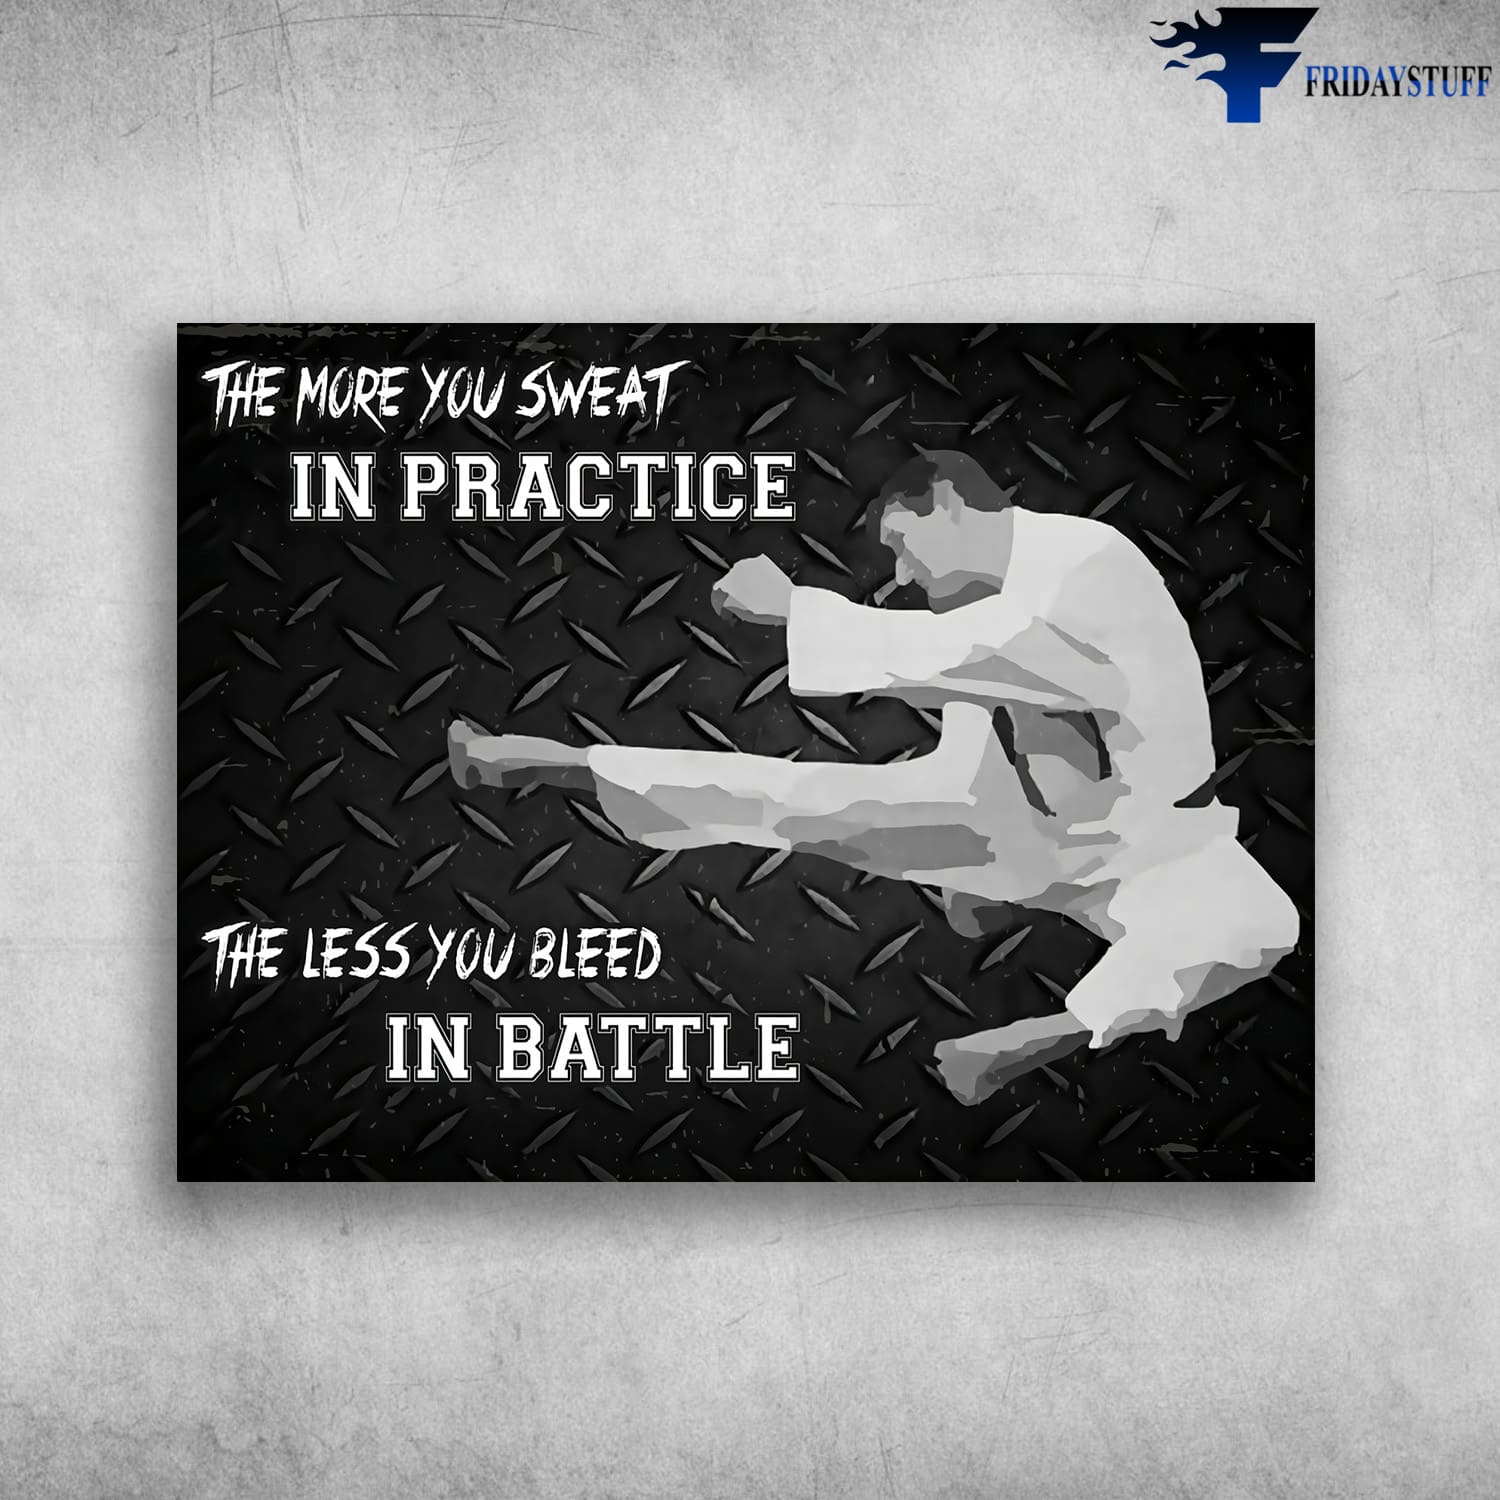 Taekwondo Poster, The More You Sweat In Practice, The Less You Bleed In Battle